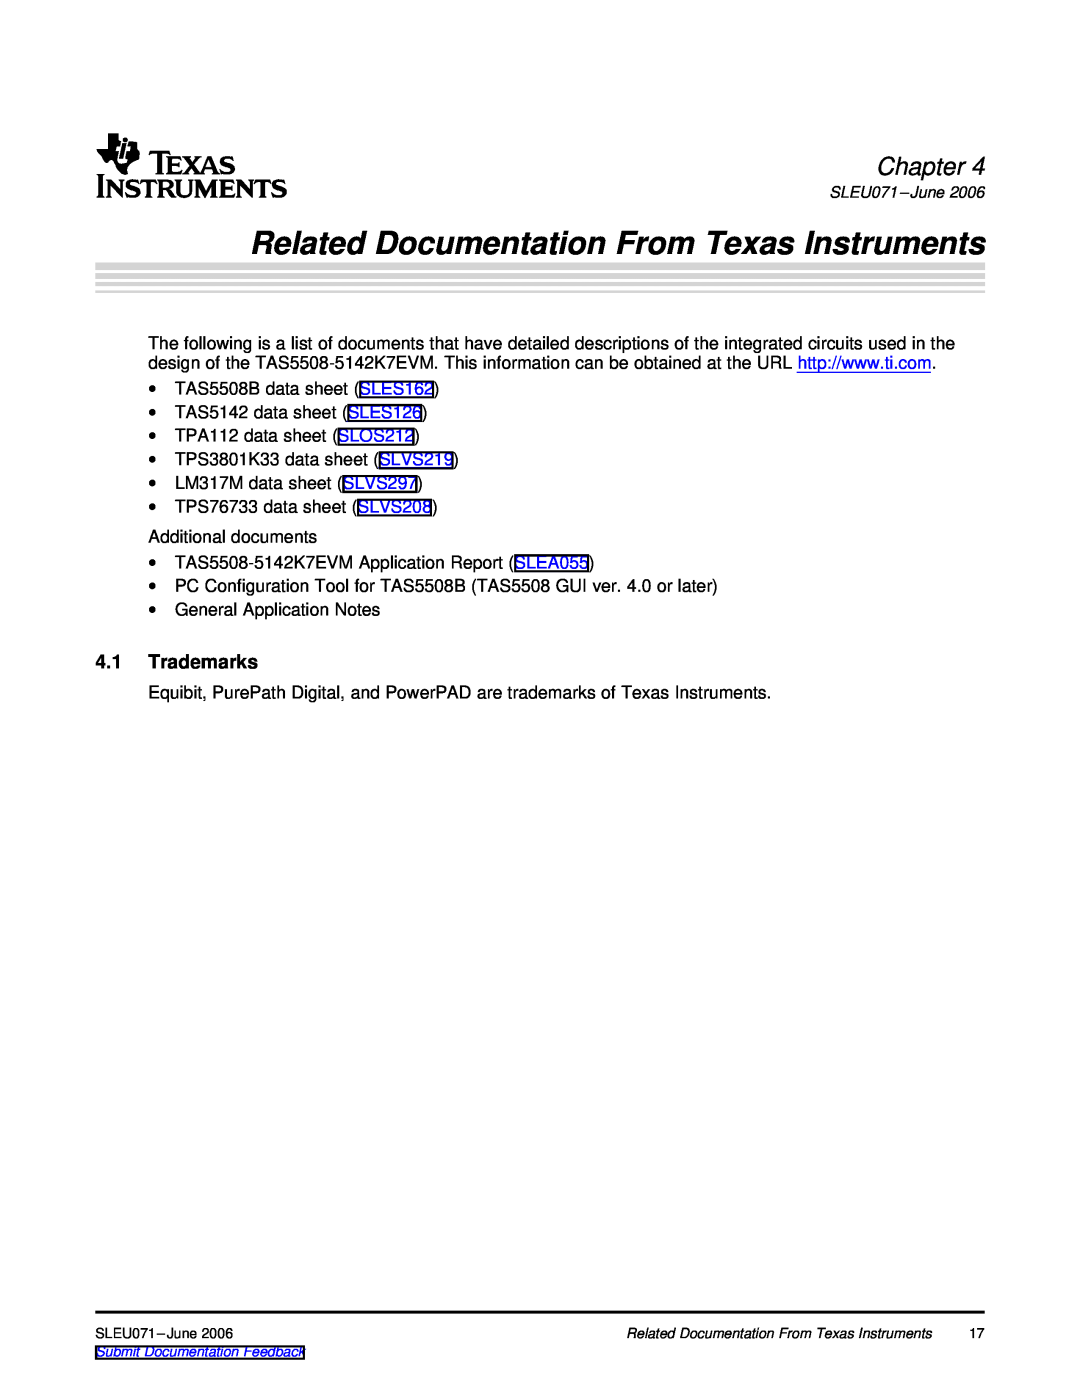 Texas Instruments TAS5508-5142K7EVM manual Related Documentation From Texas Instruments, Chapter, 4.1Trademarks 